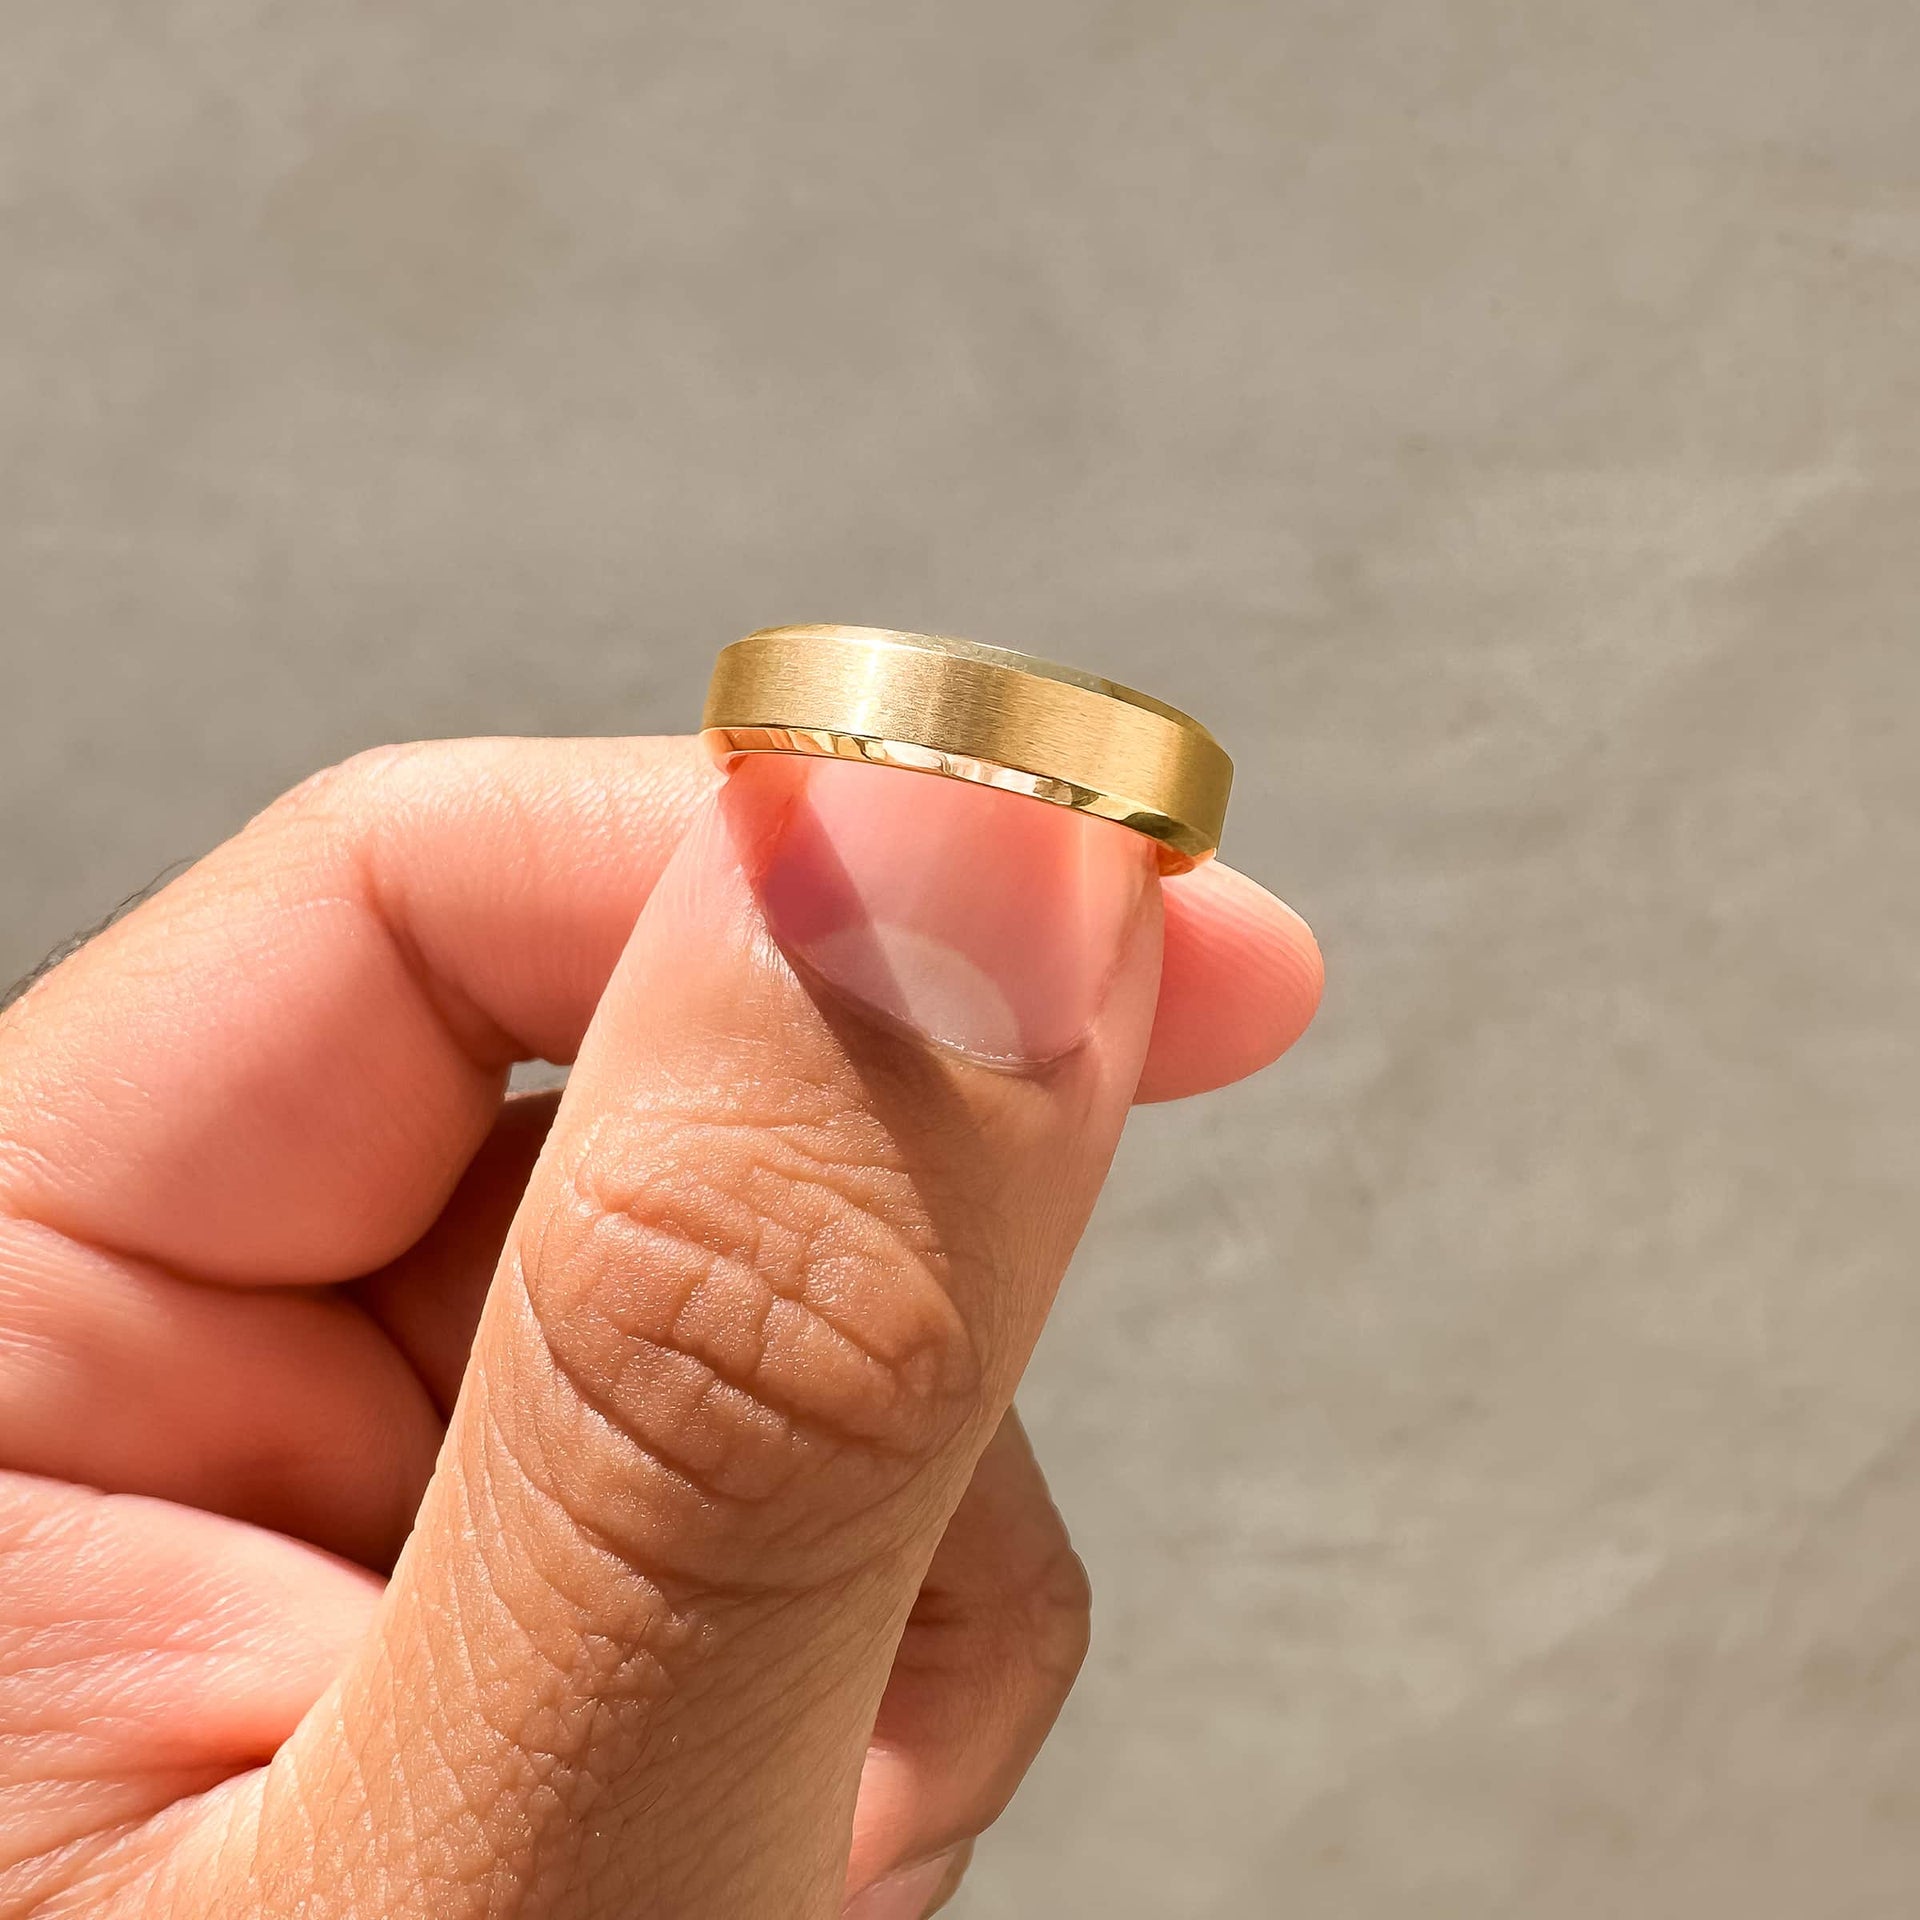 Man pinching gold chic wedding band with neutral background